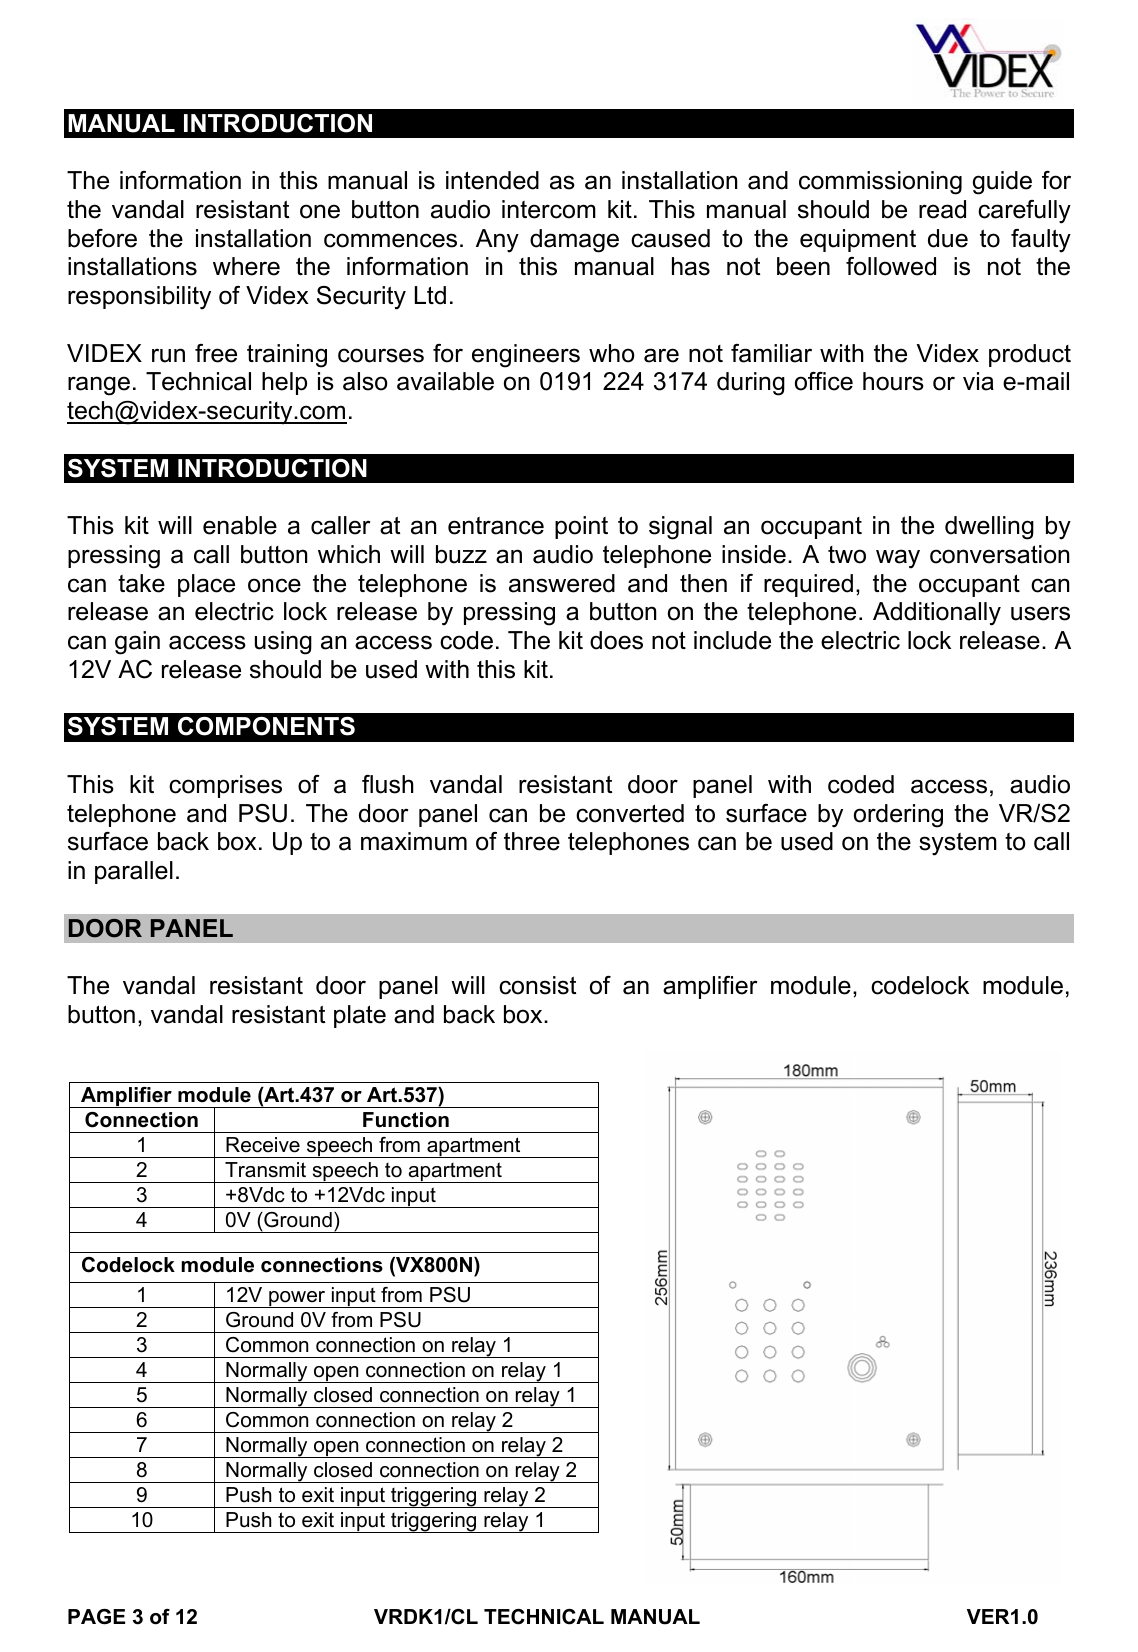 Page 3 of 12 - VRDK1CLManual Videx-VRDK1CL-Manual-with-codelock